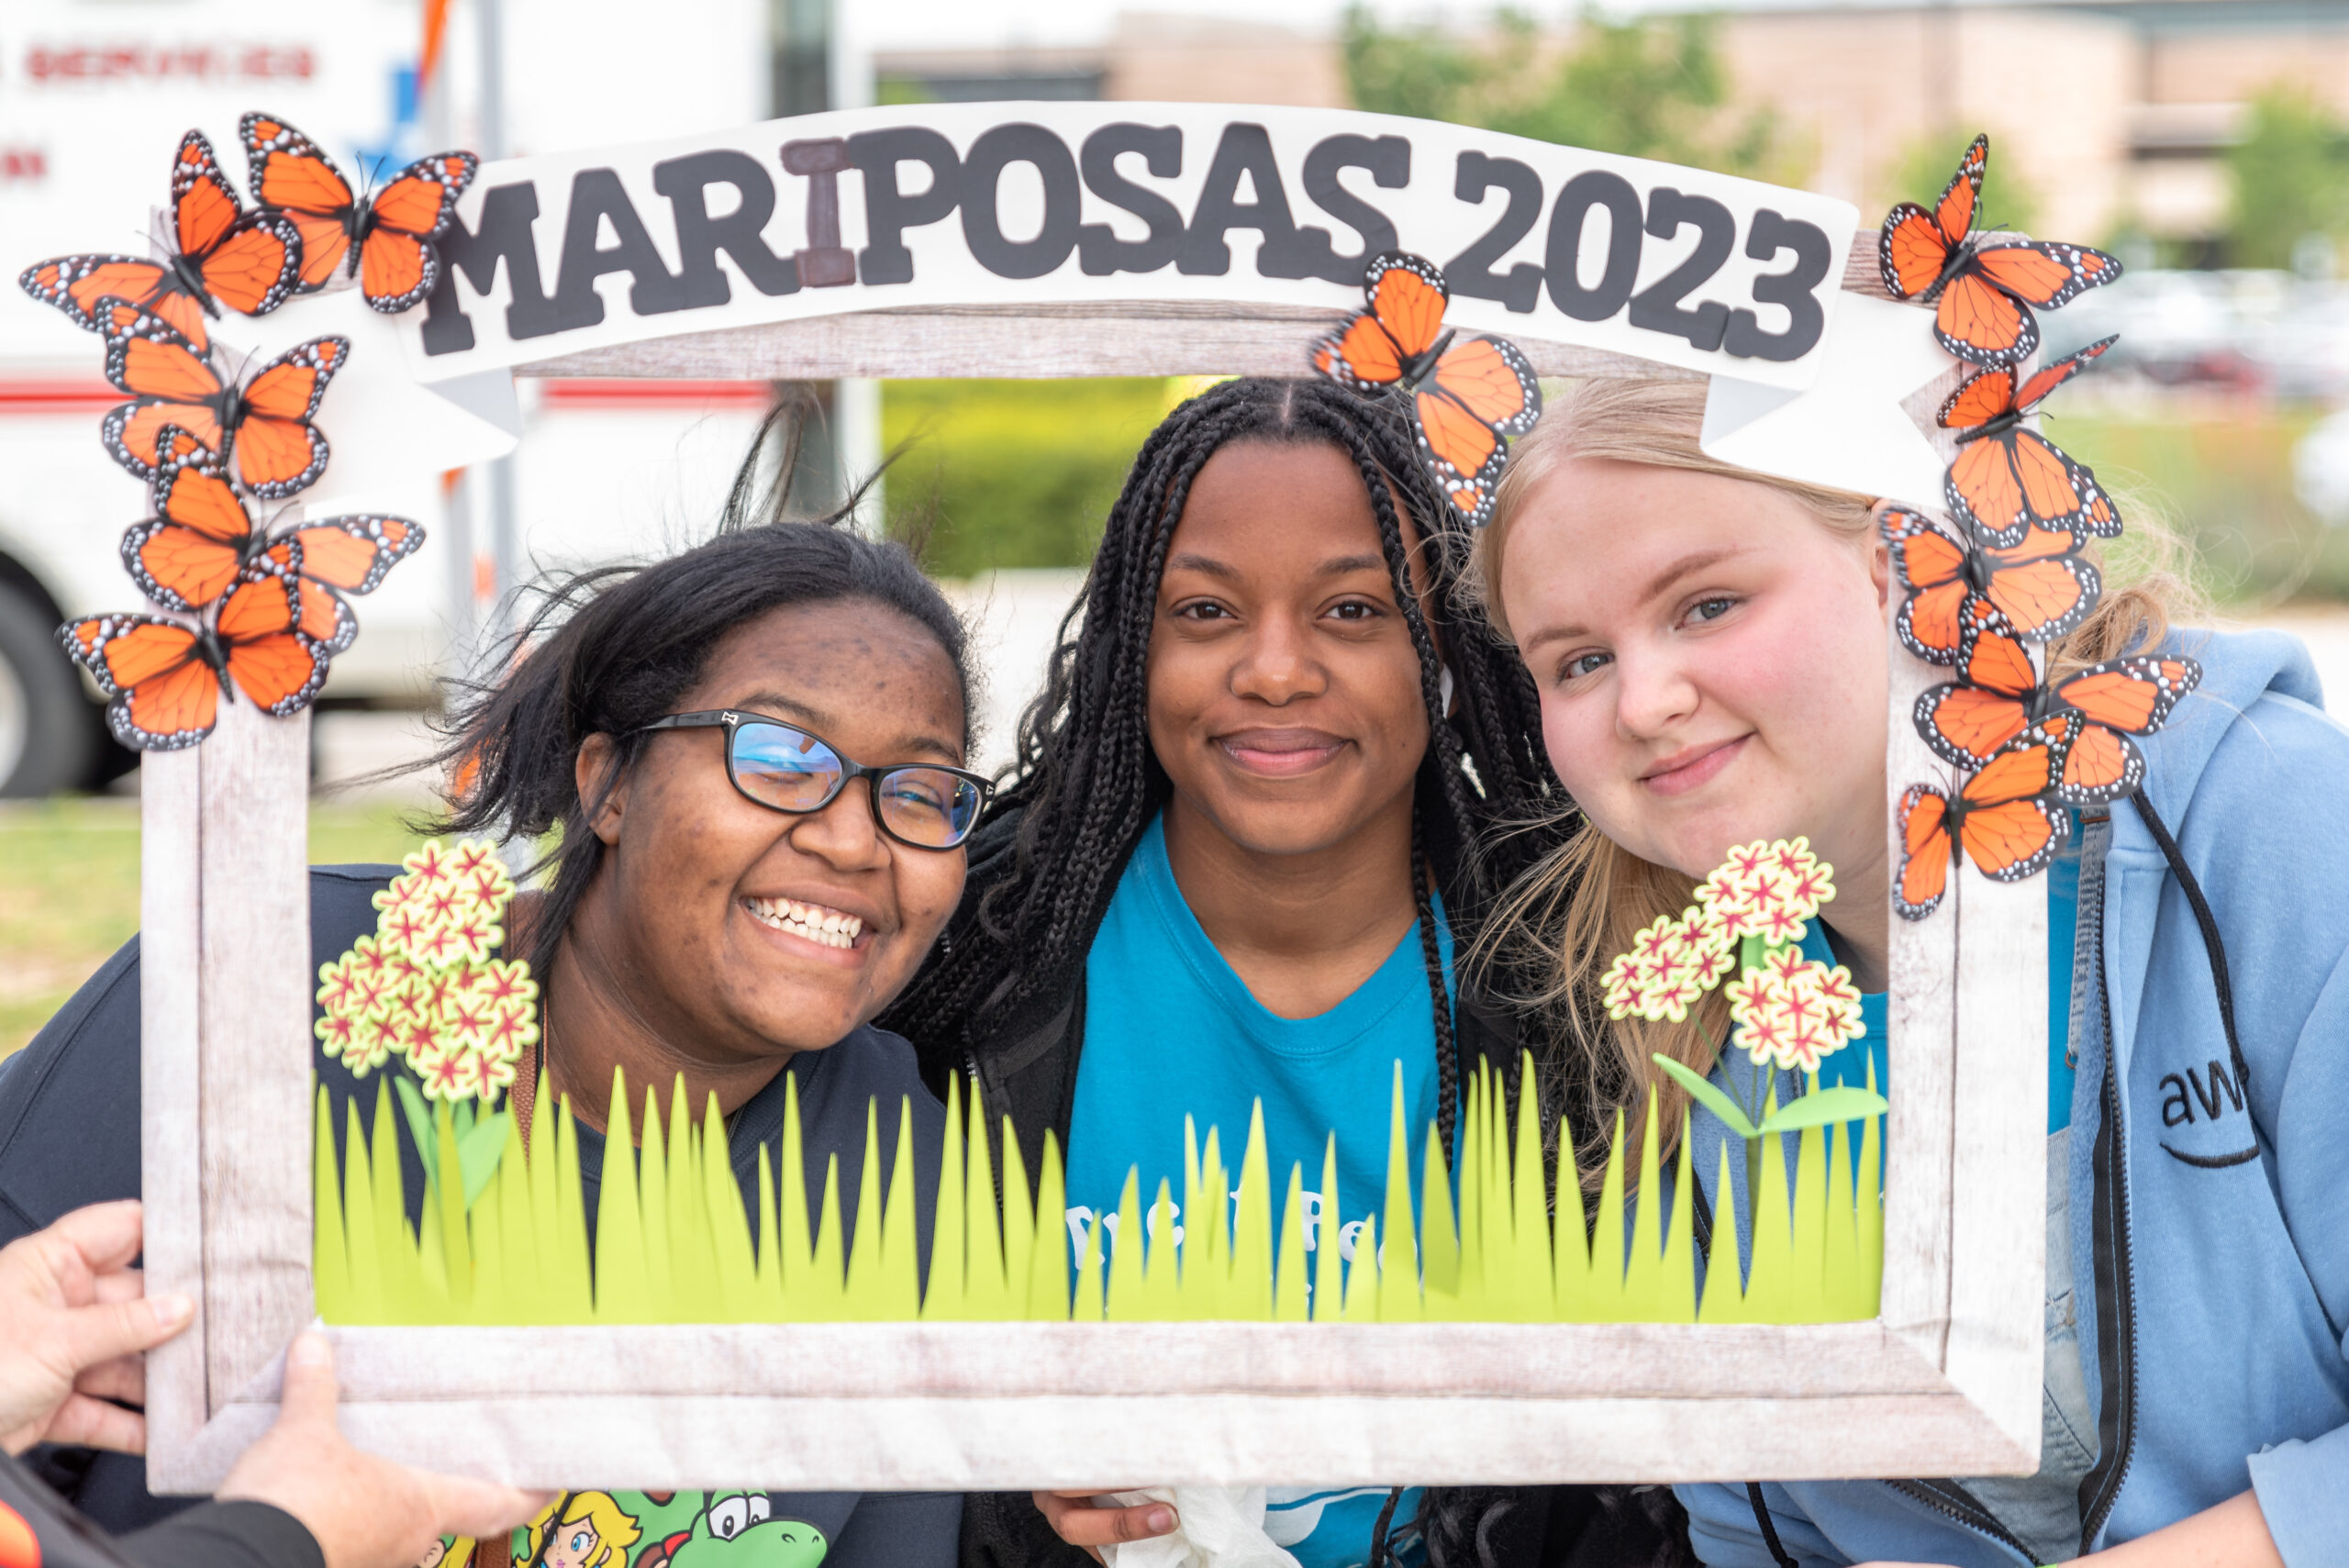 Three people pose for a photo with a photo frame prop that reads, "MARIPOSAS 2023".